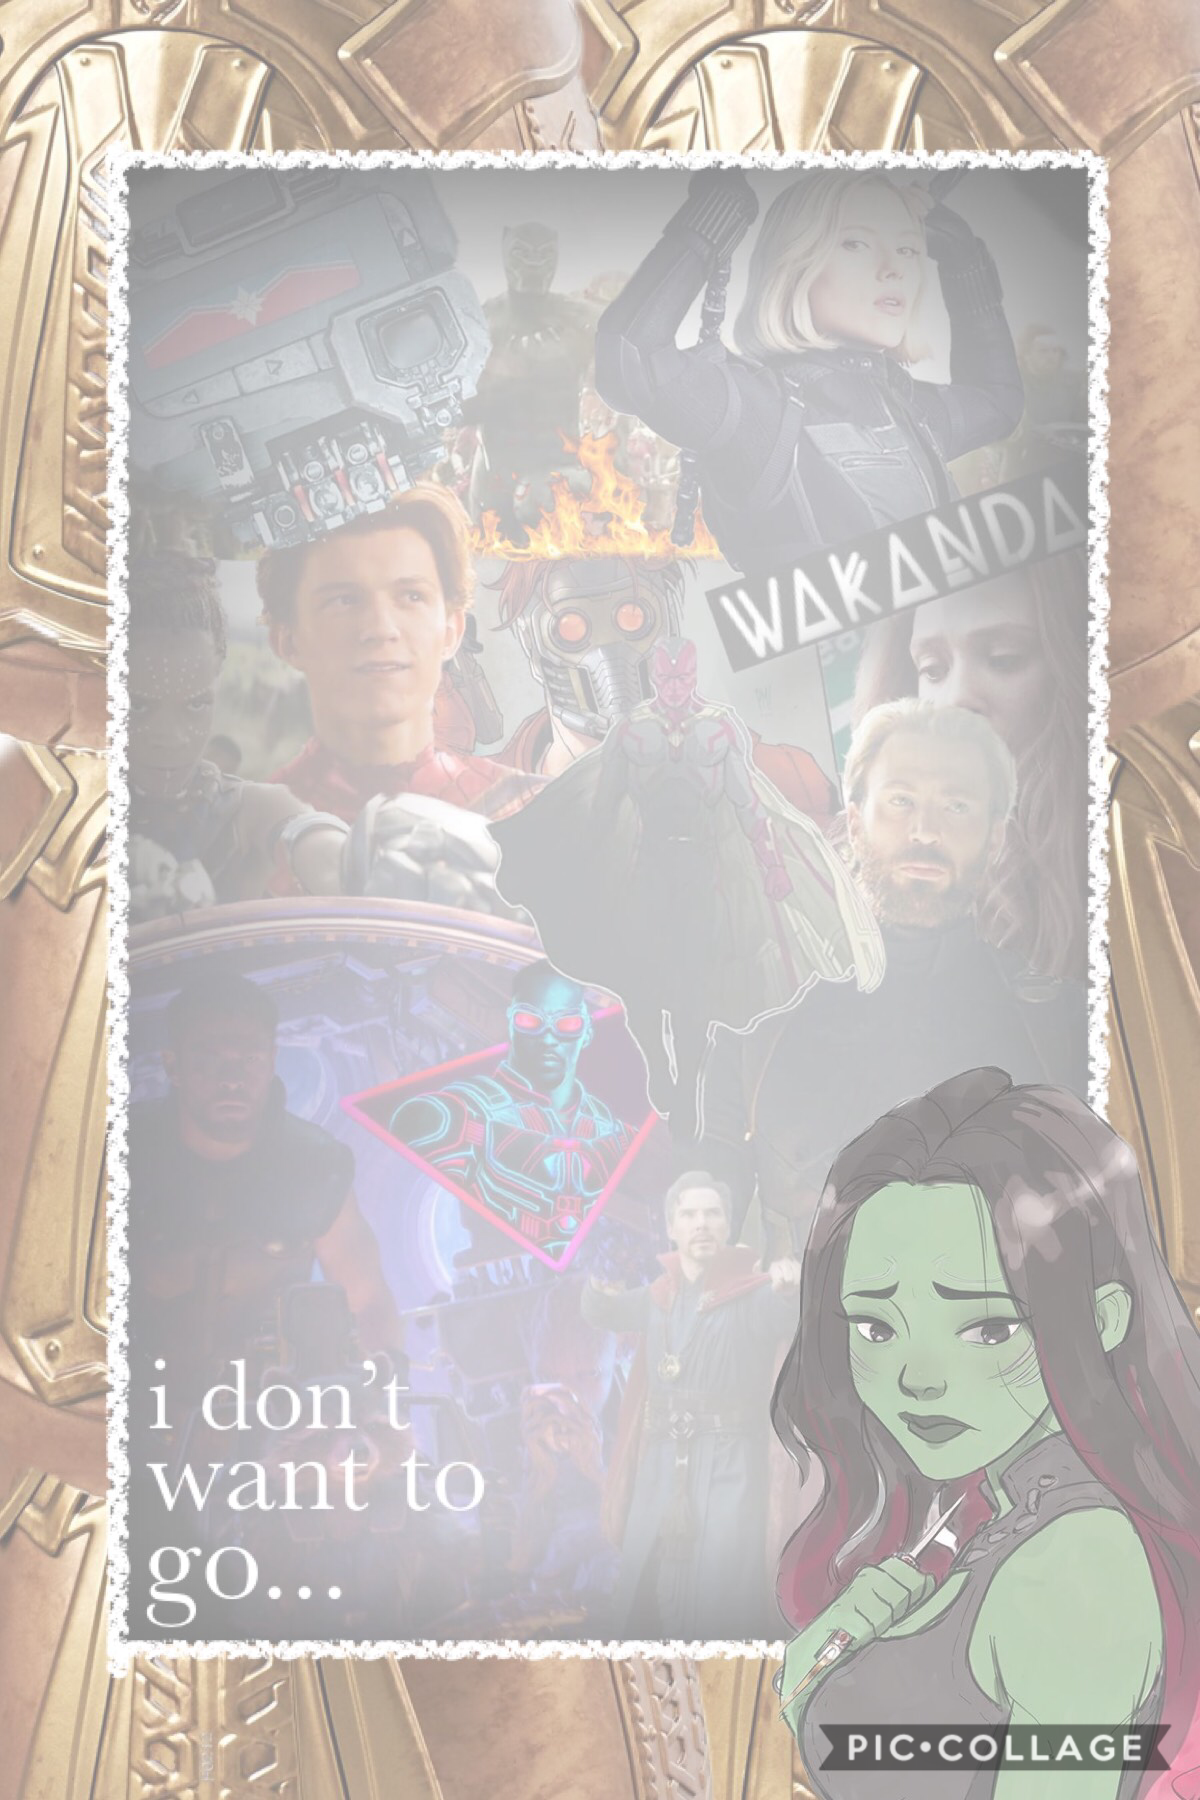 • Tap me •
Yes, I know the quote doesn’t match Gamora (😢) but y not mix things up? (Low key trying not to give spoilers😂) I’m going on a long trip this weekend so pls comment games that don’t require WiFi. Thanks. Self promo alert⚠️ Extras acc @flyingdolp